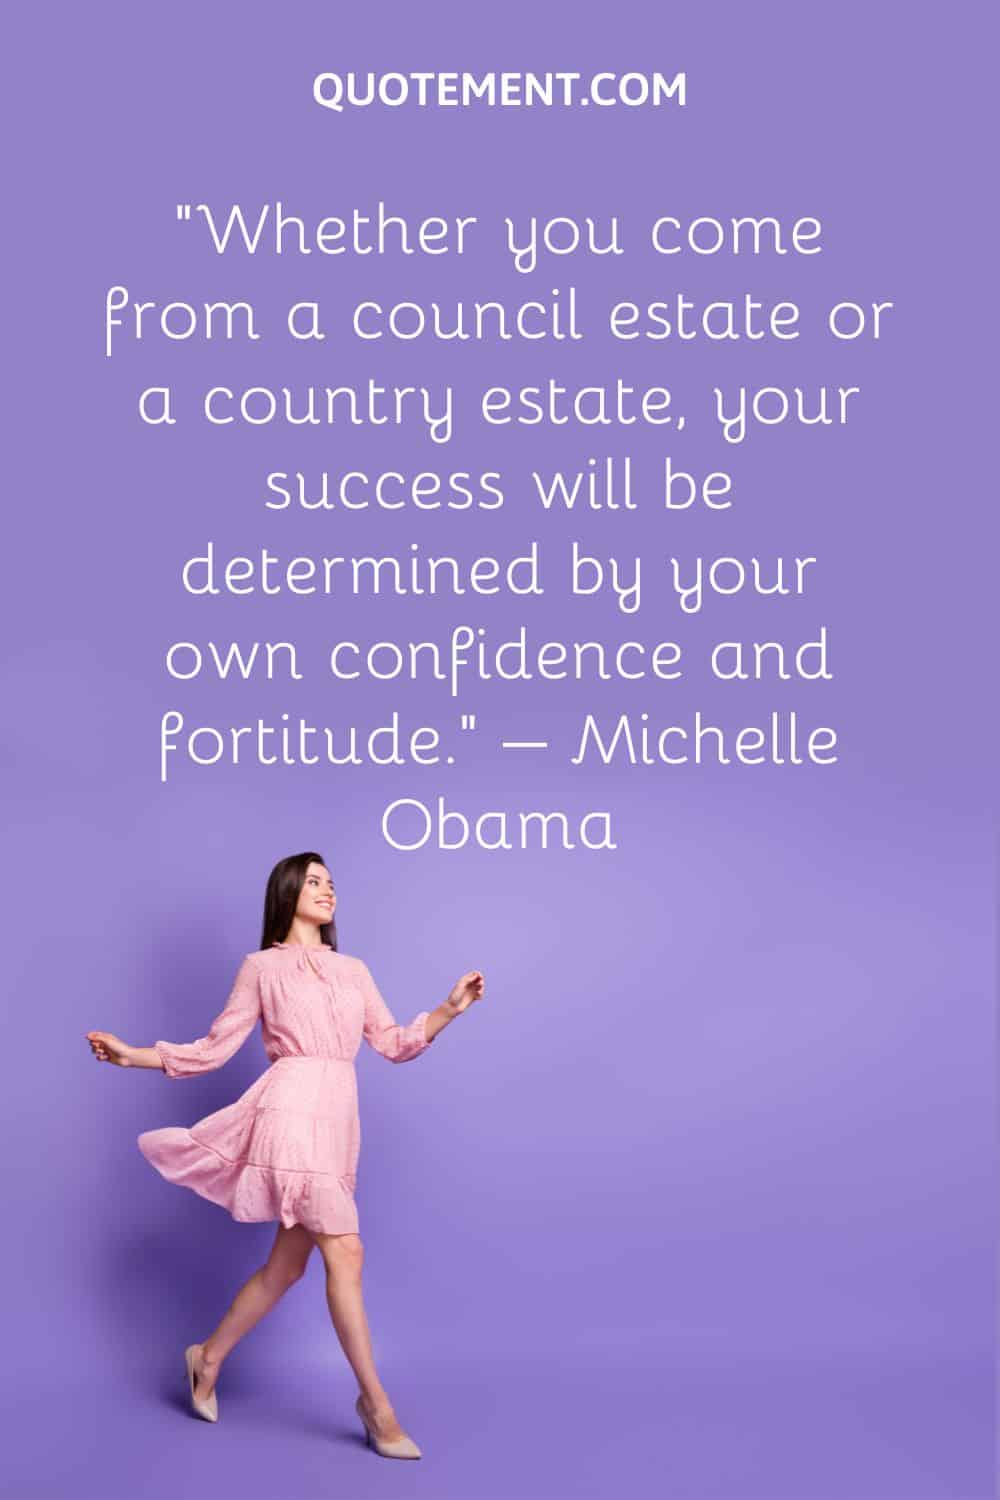 Whether you come from a council estate or a country estate, your success will be determined by your own confidence and fortitude